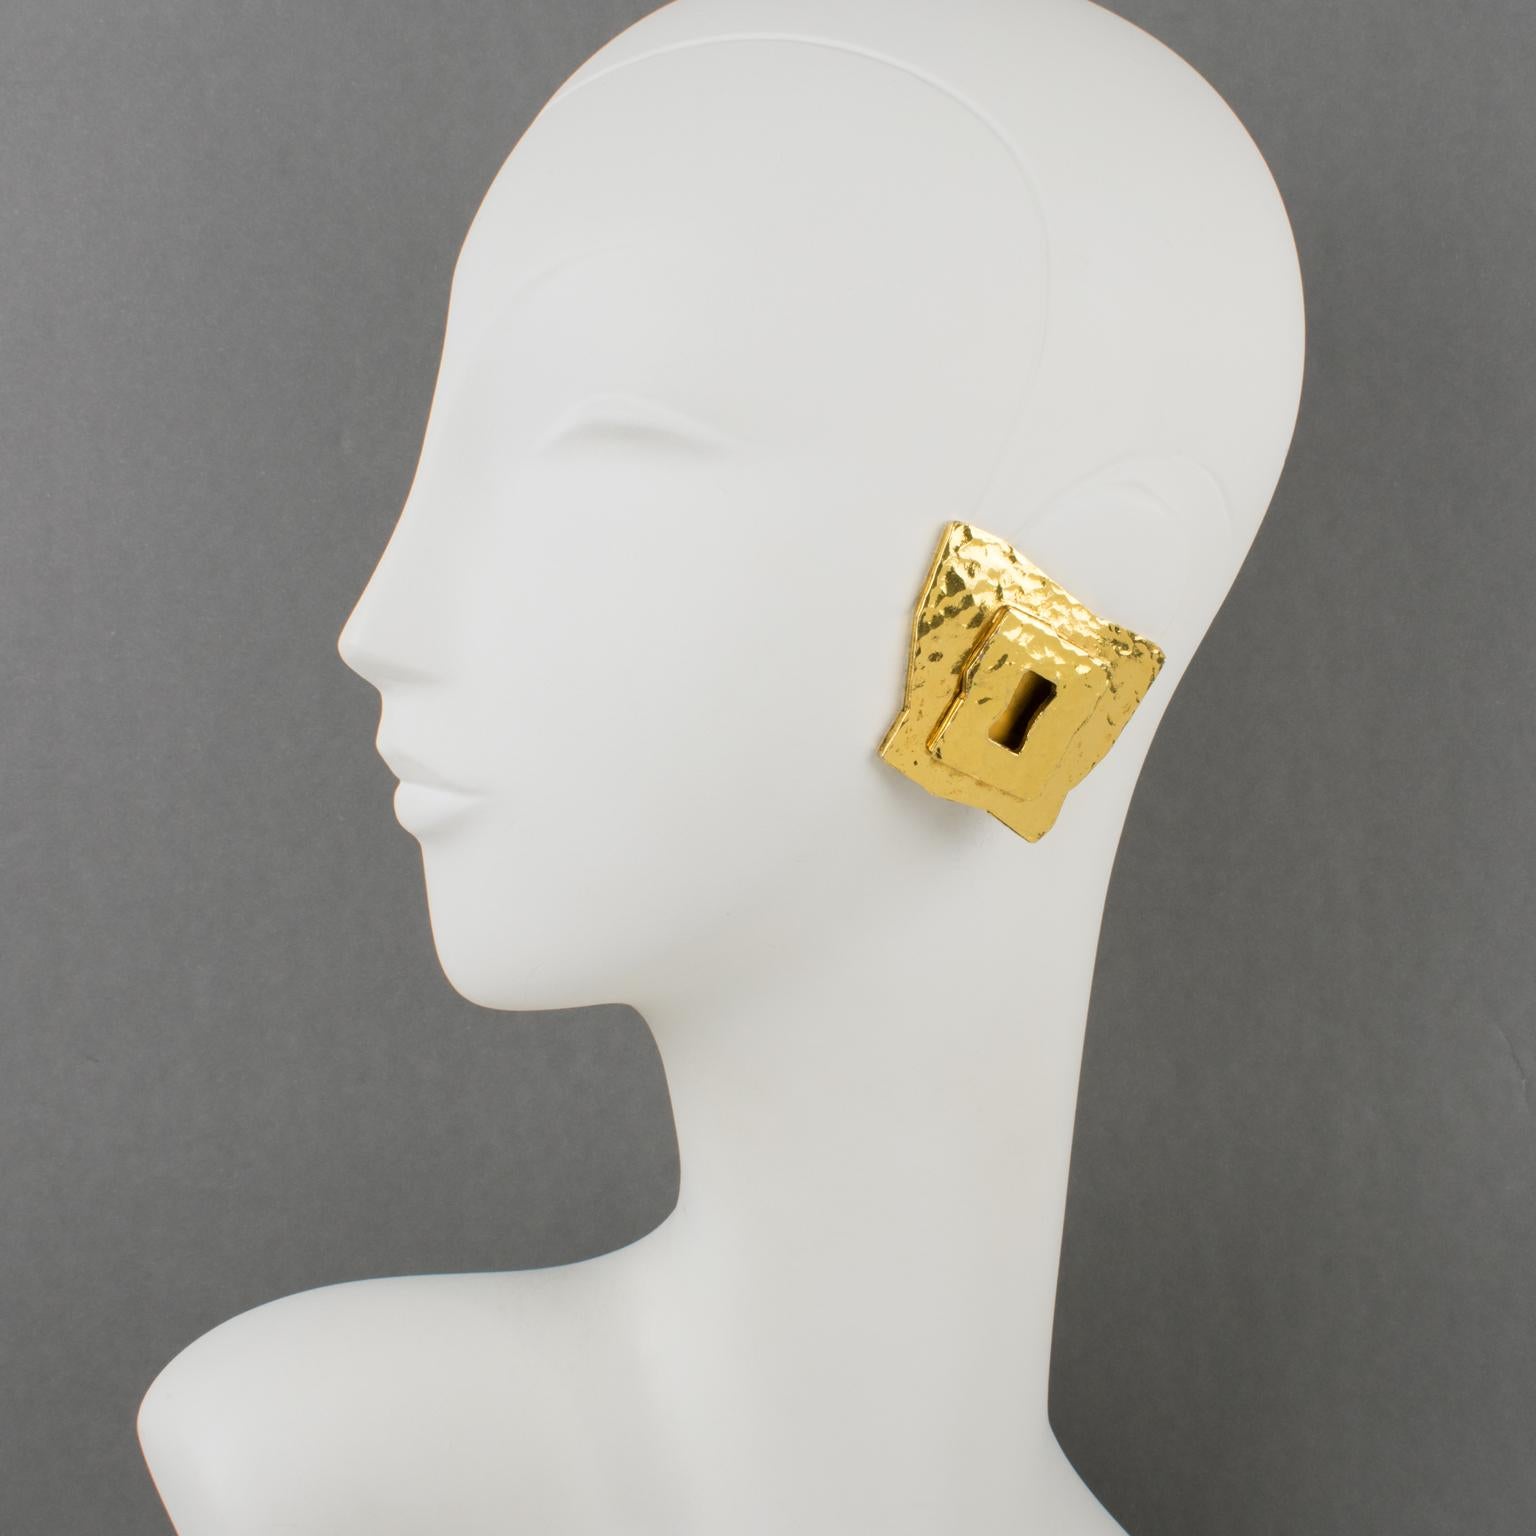 Very chic Mercedes Robirosa Paris clip-on earrings. Oversized modernist style with dimensional geometric shape featuring a sort of lock entry with gilt metal all textured and lightly hammered. Signed at the back with brand logo.
Measurements: 1.75